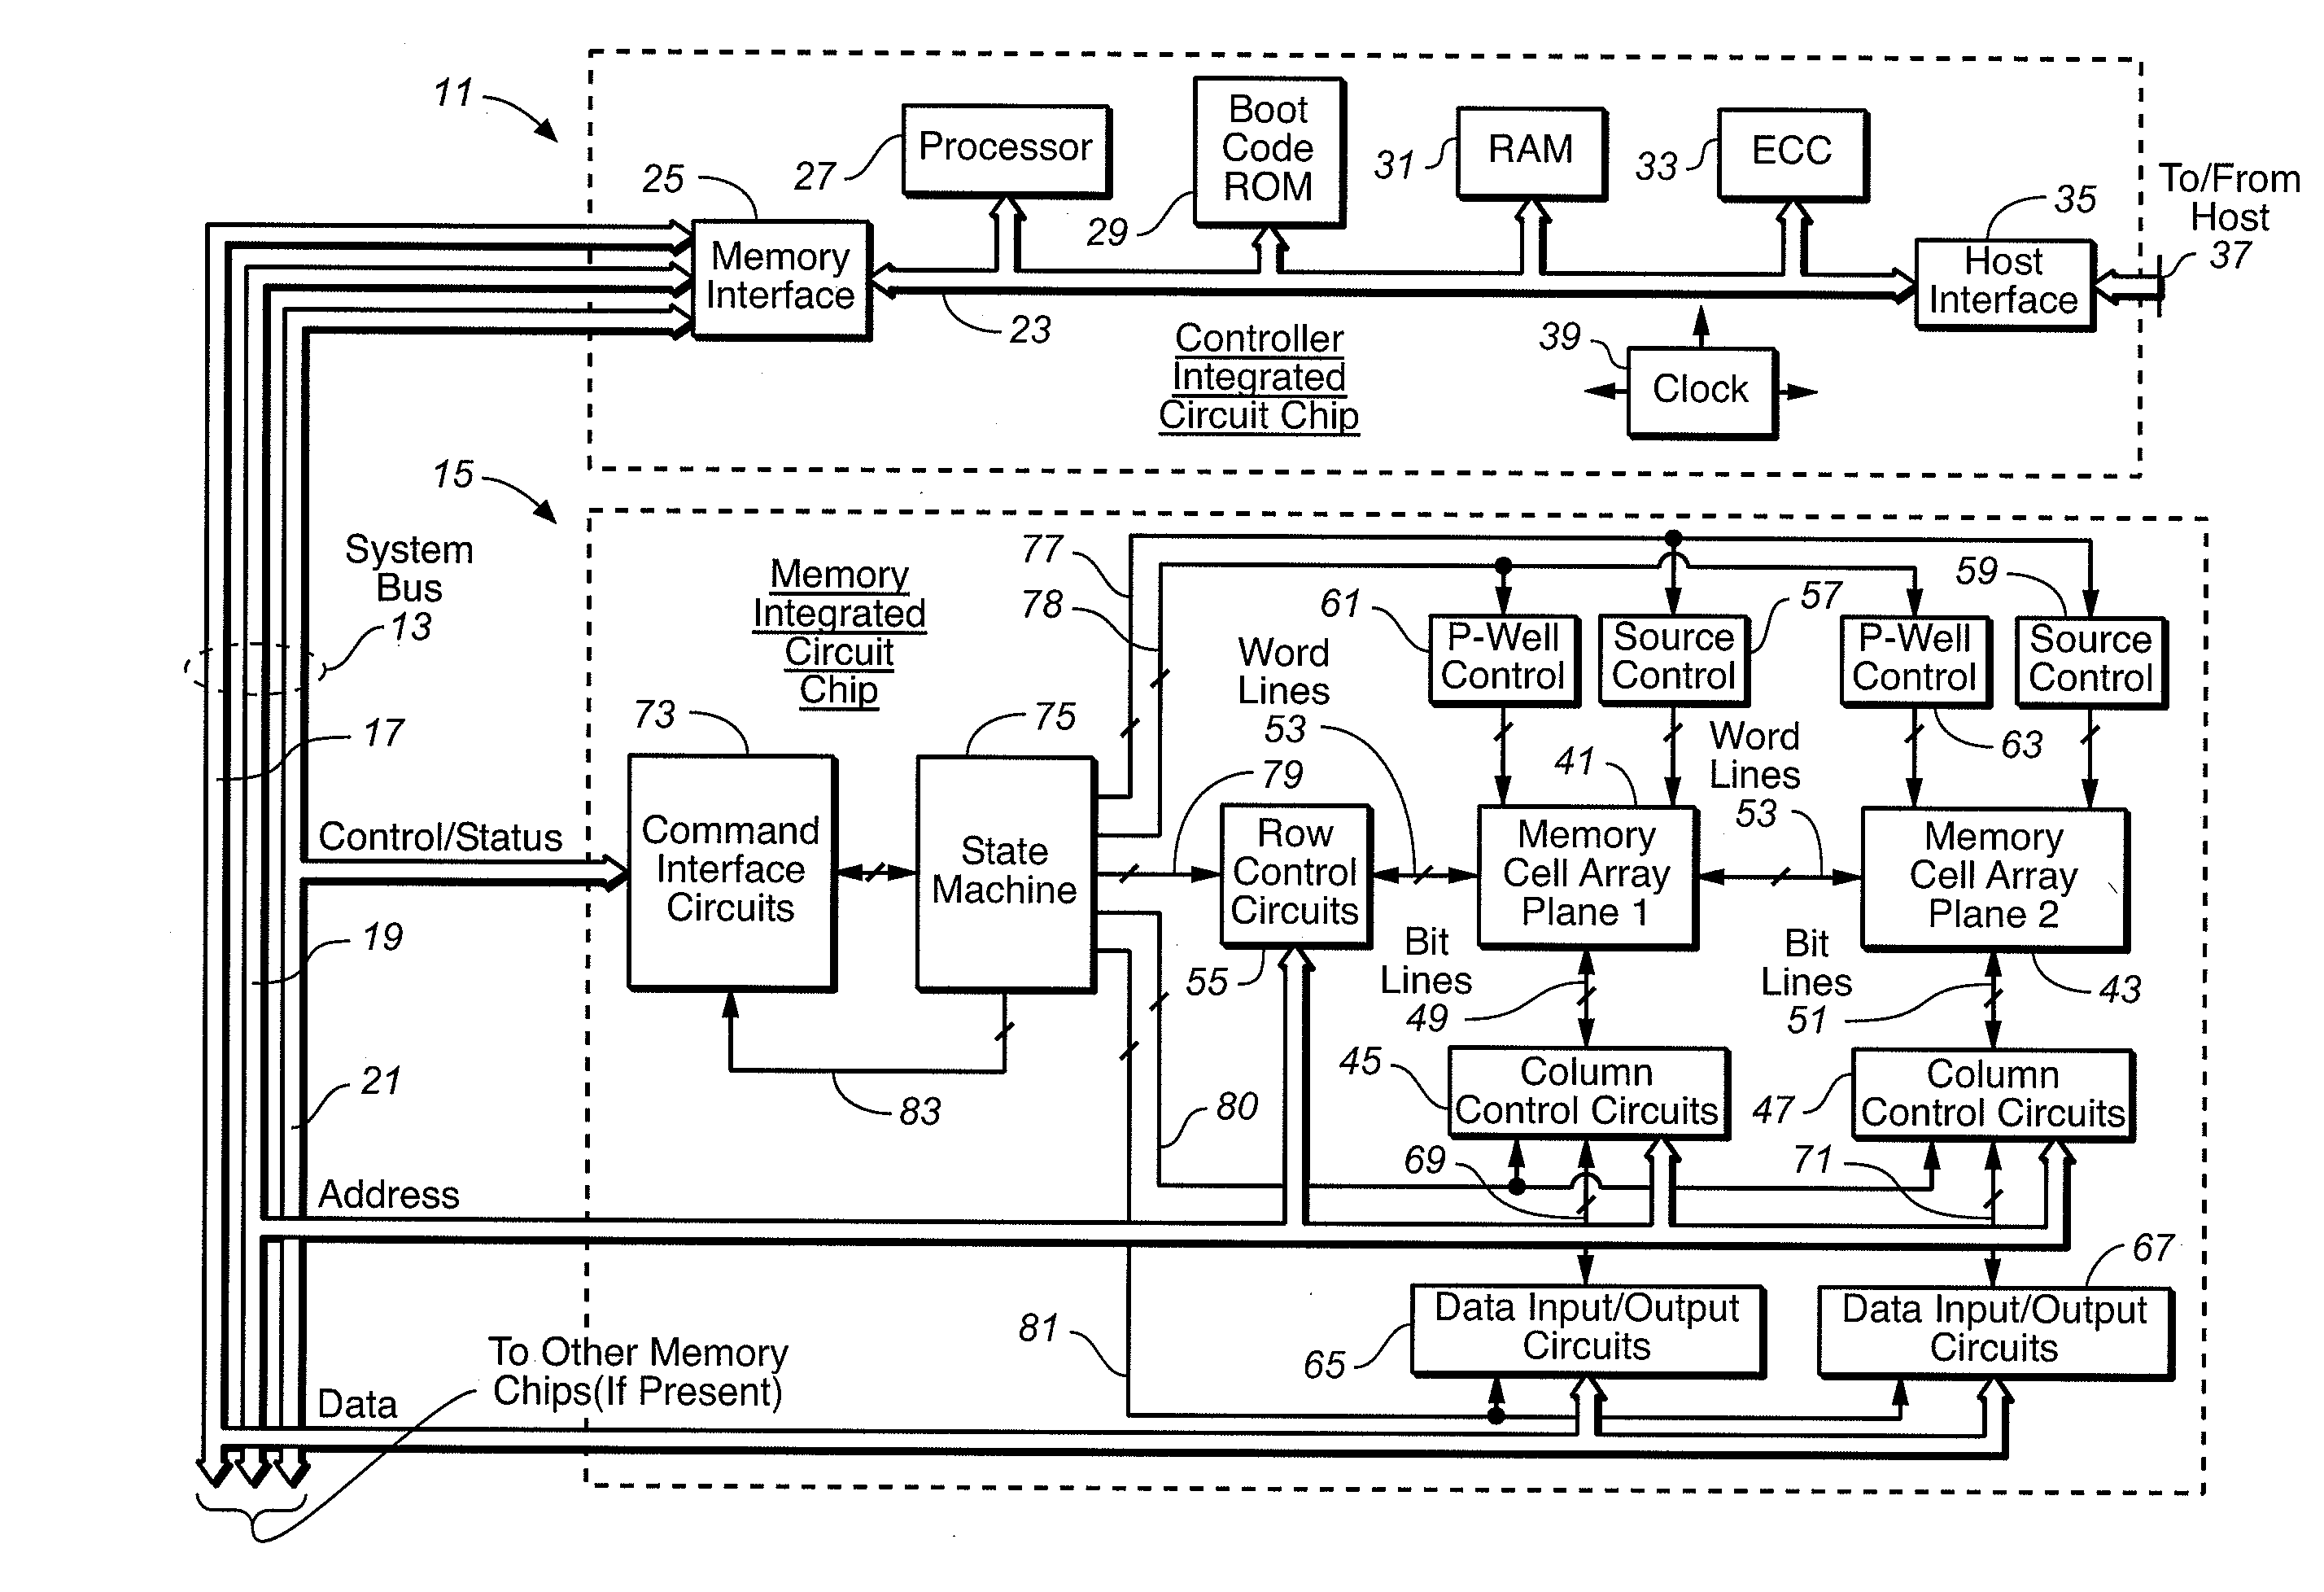 Host System That Manages a LBA Interface With Flash Memory